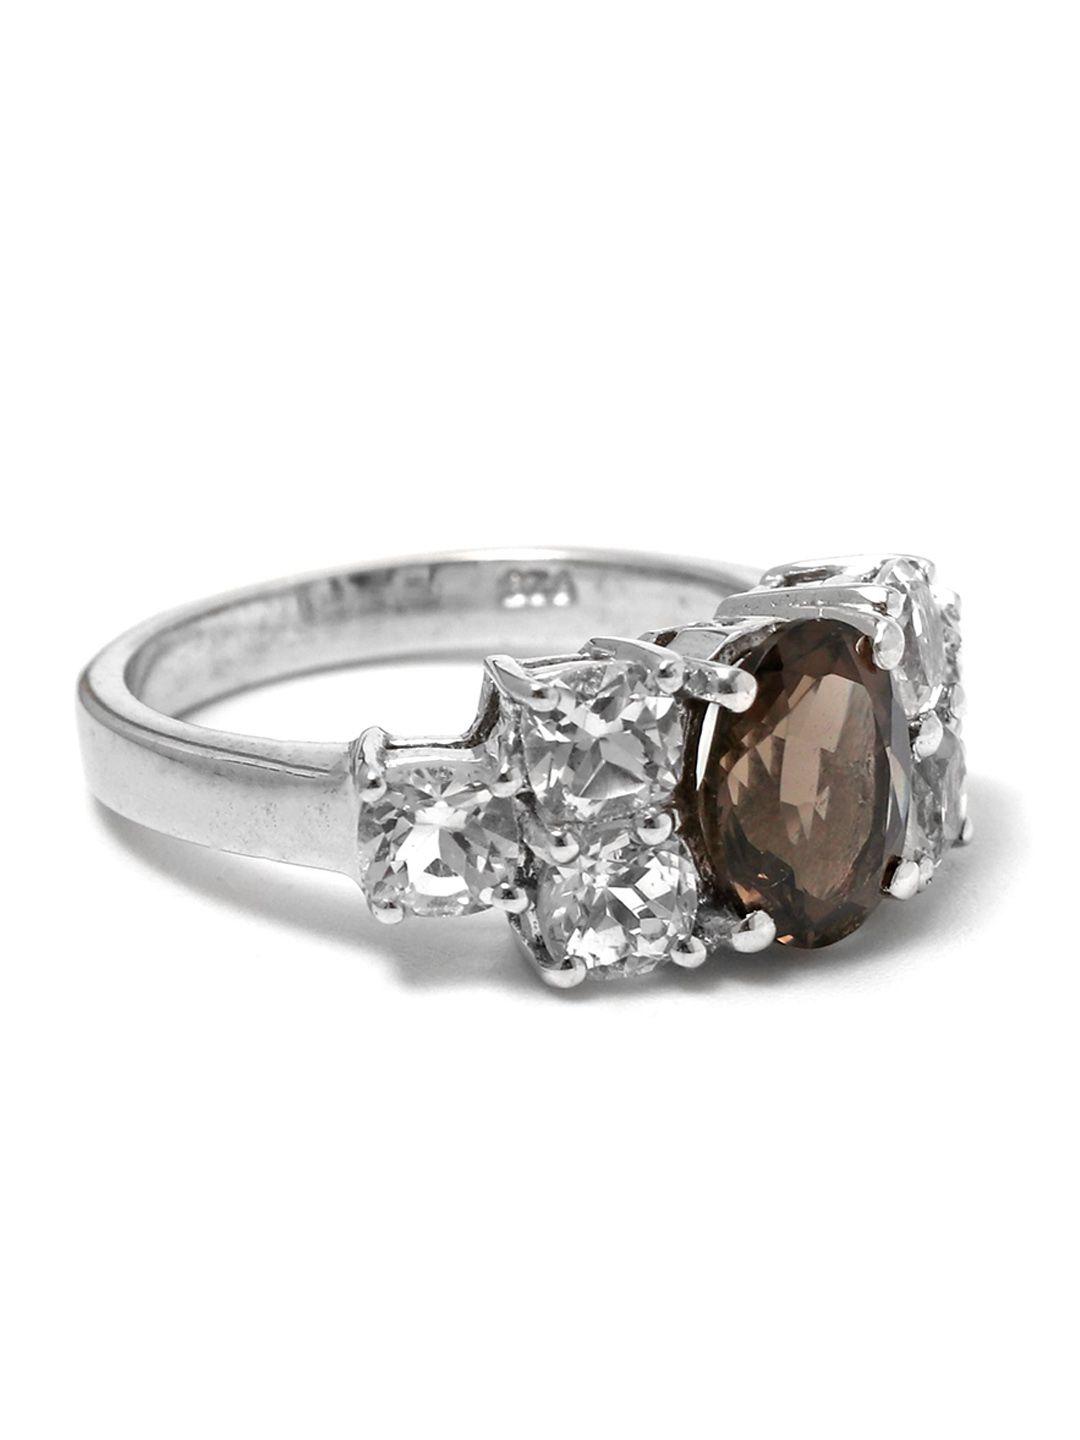 hiflyer jewels brown rhodium-plated sterling silver stone studded finger ring